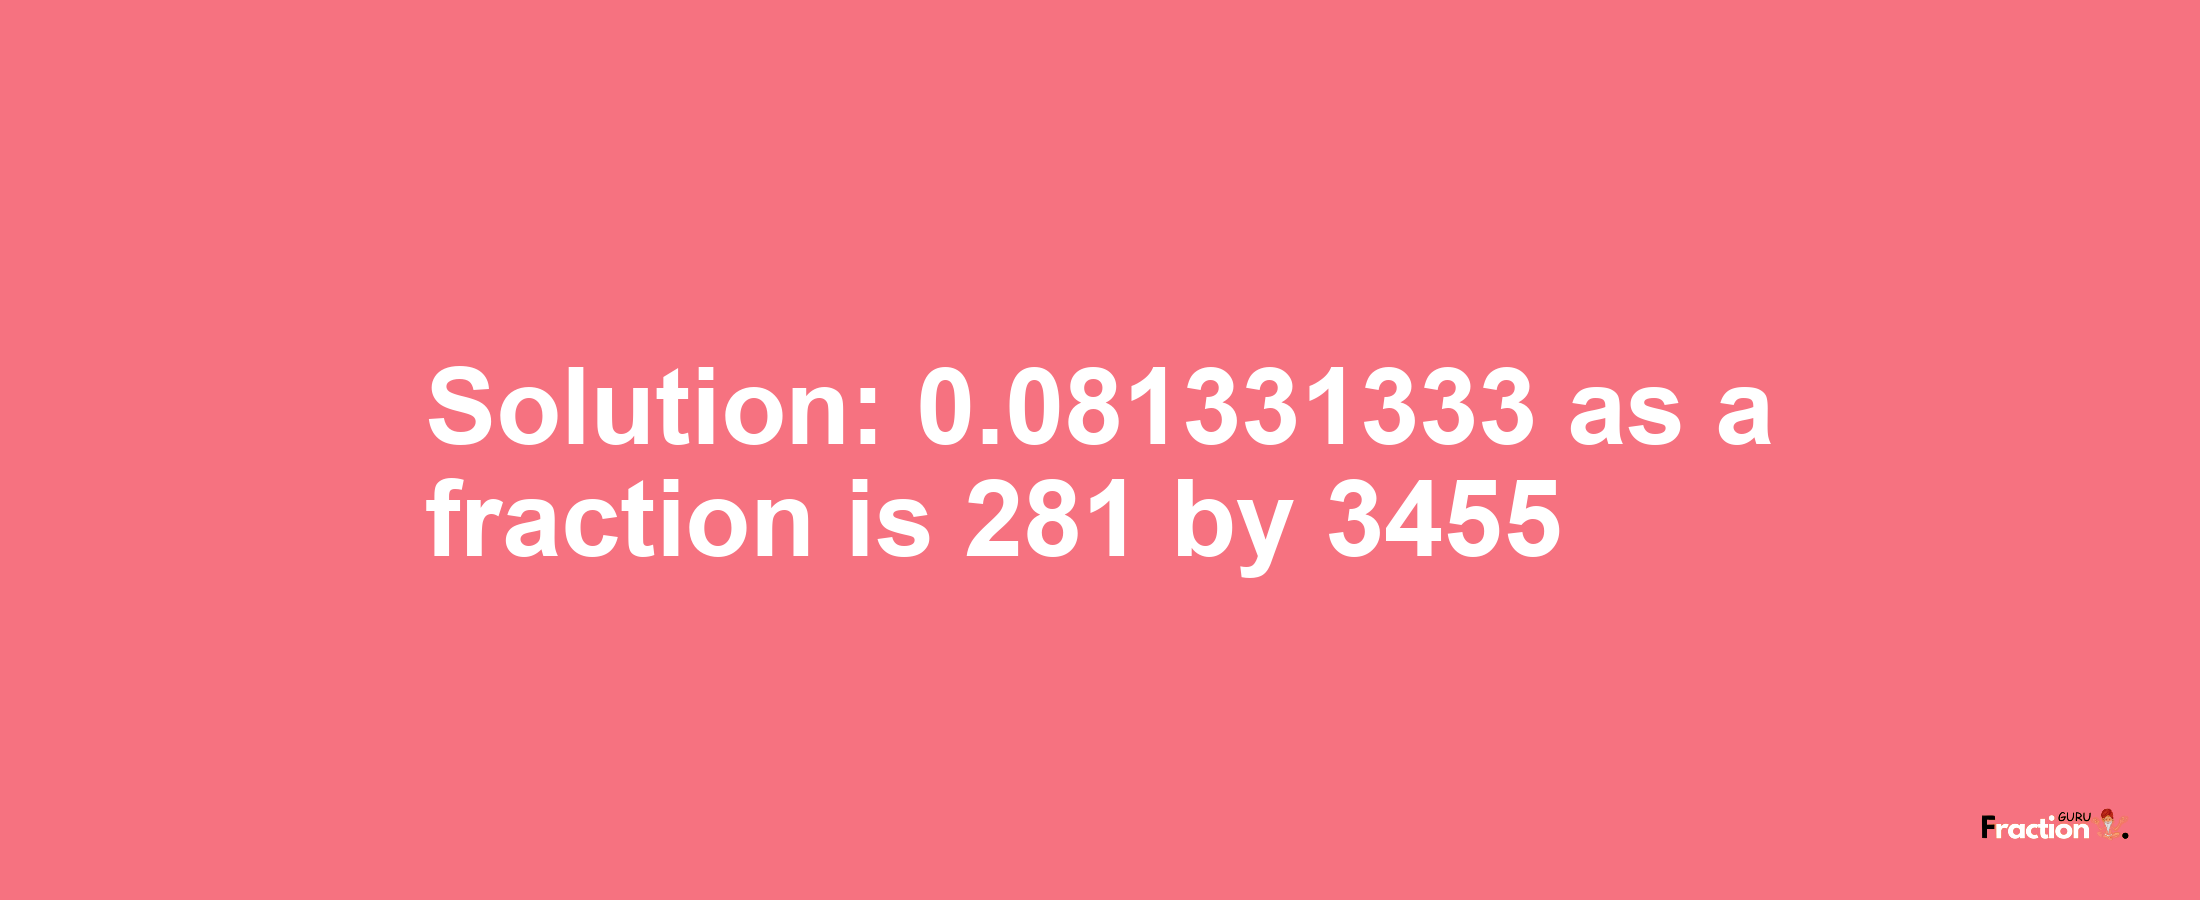 Solution:0.081331333 as a fraction is 281/3455